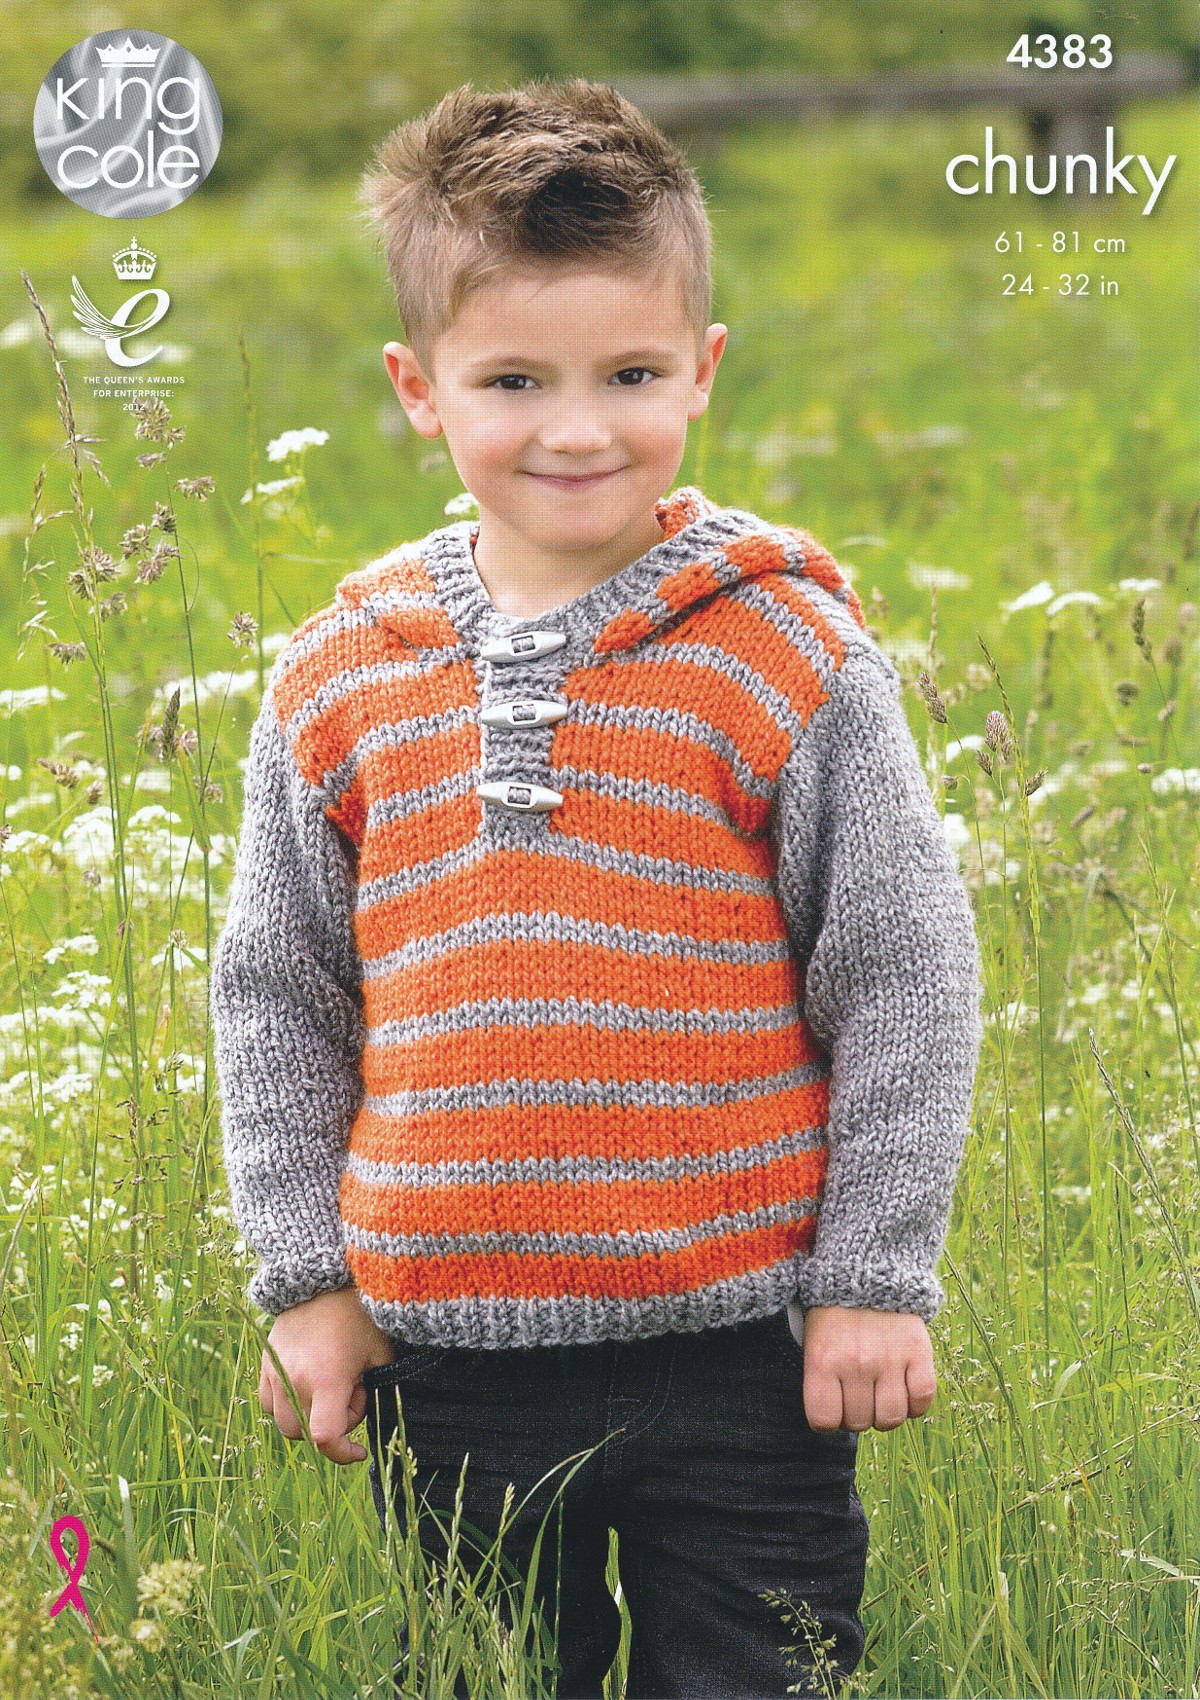 Boy Knitting Patterns Details About Boys Chunky Knitting Pattern King Cole Kids Striped Hooded Sweater Gilet 4383